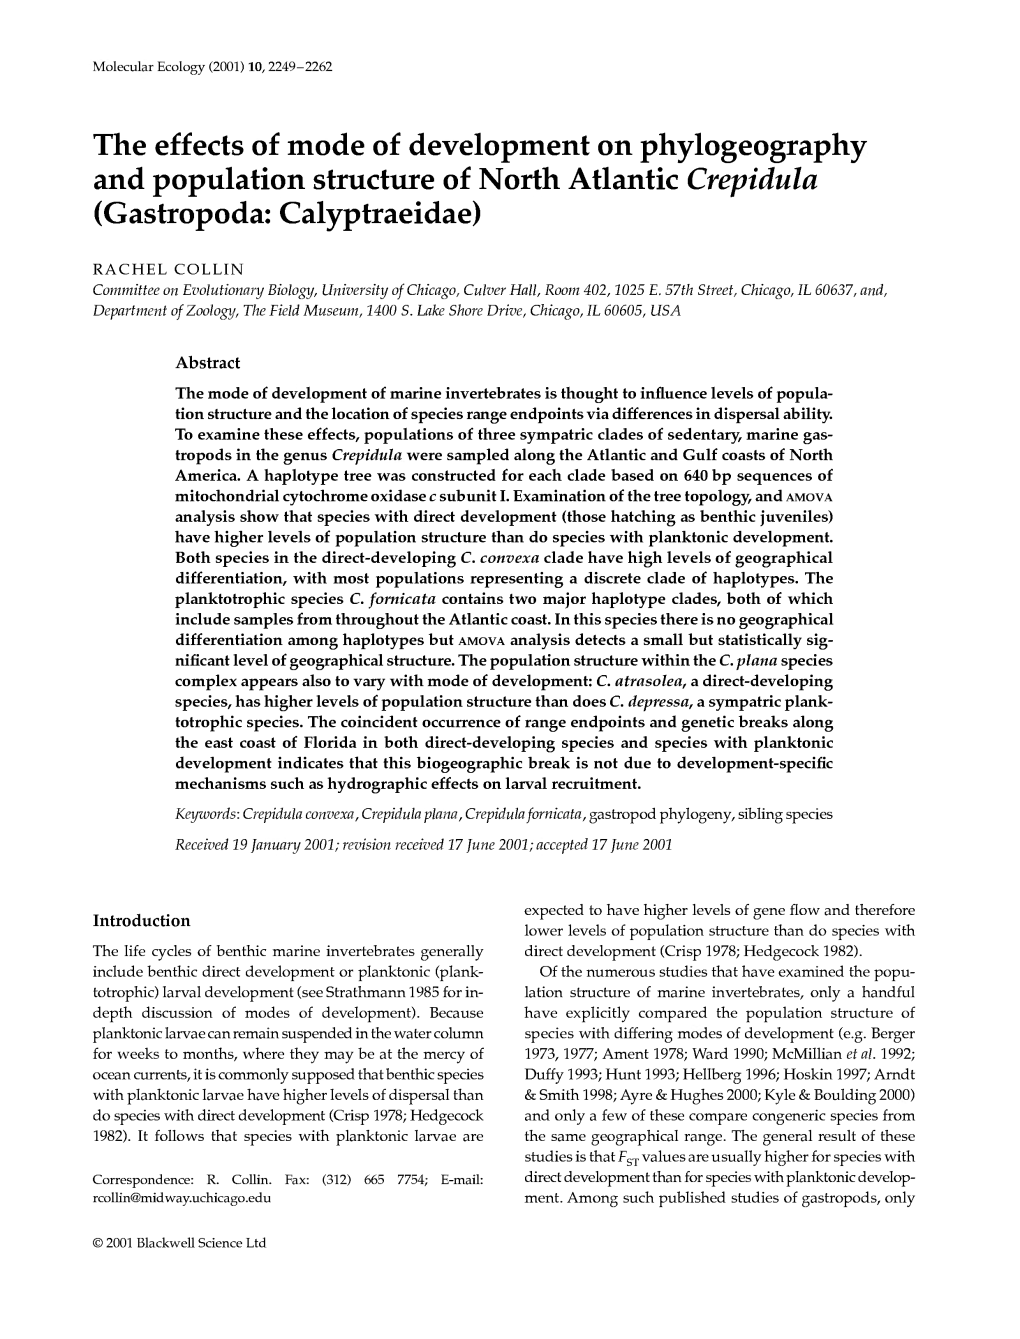 The Effects of Mode of Development on Phylogeography and Population Structure of North Atlantic Crepidula (Gastropoda: Calyptraeidae)